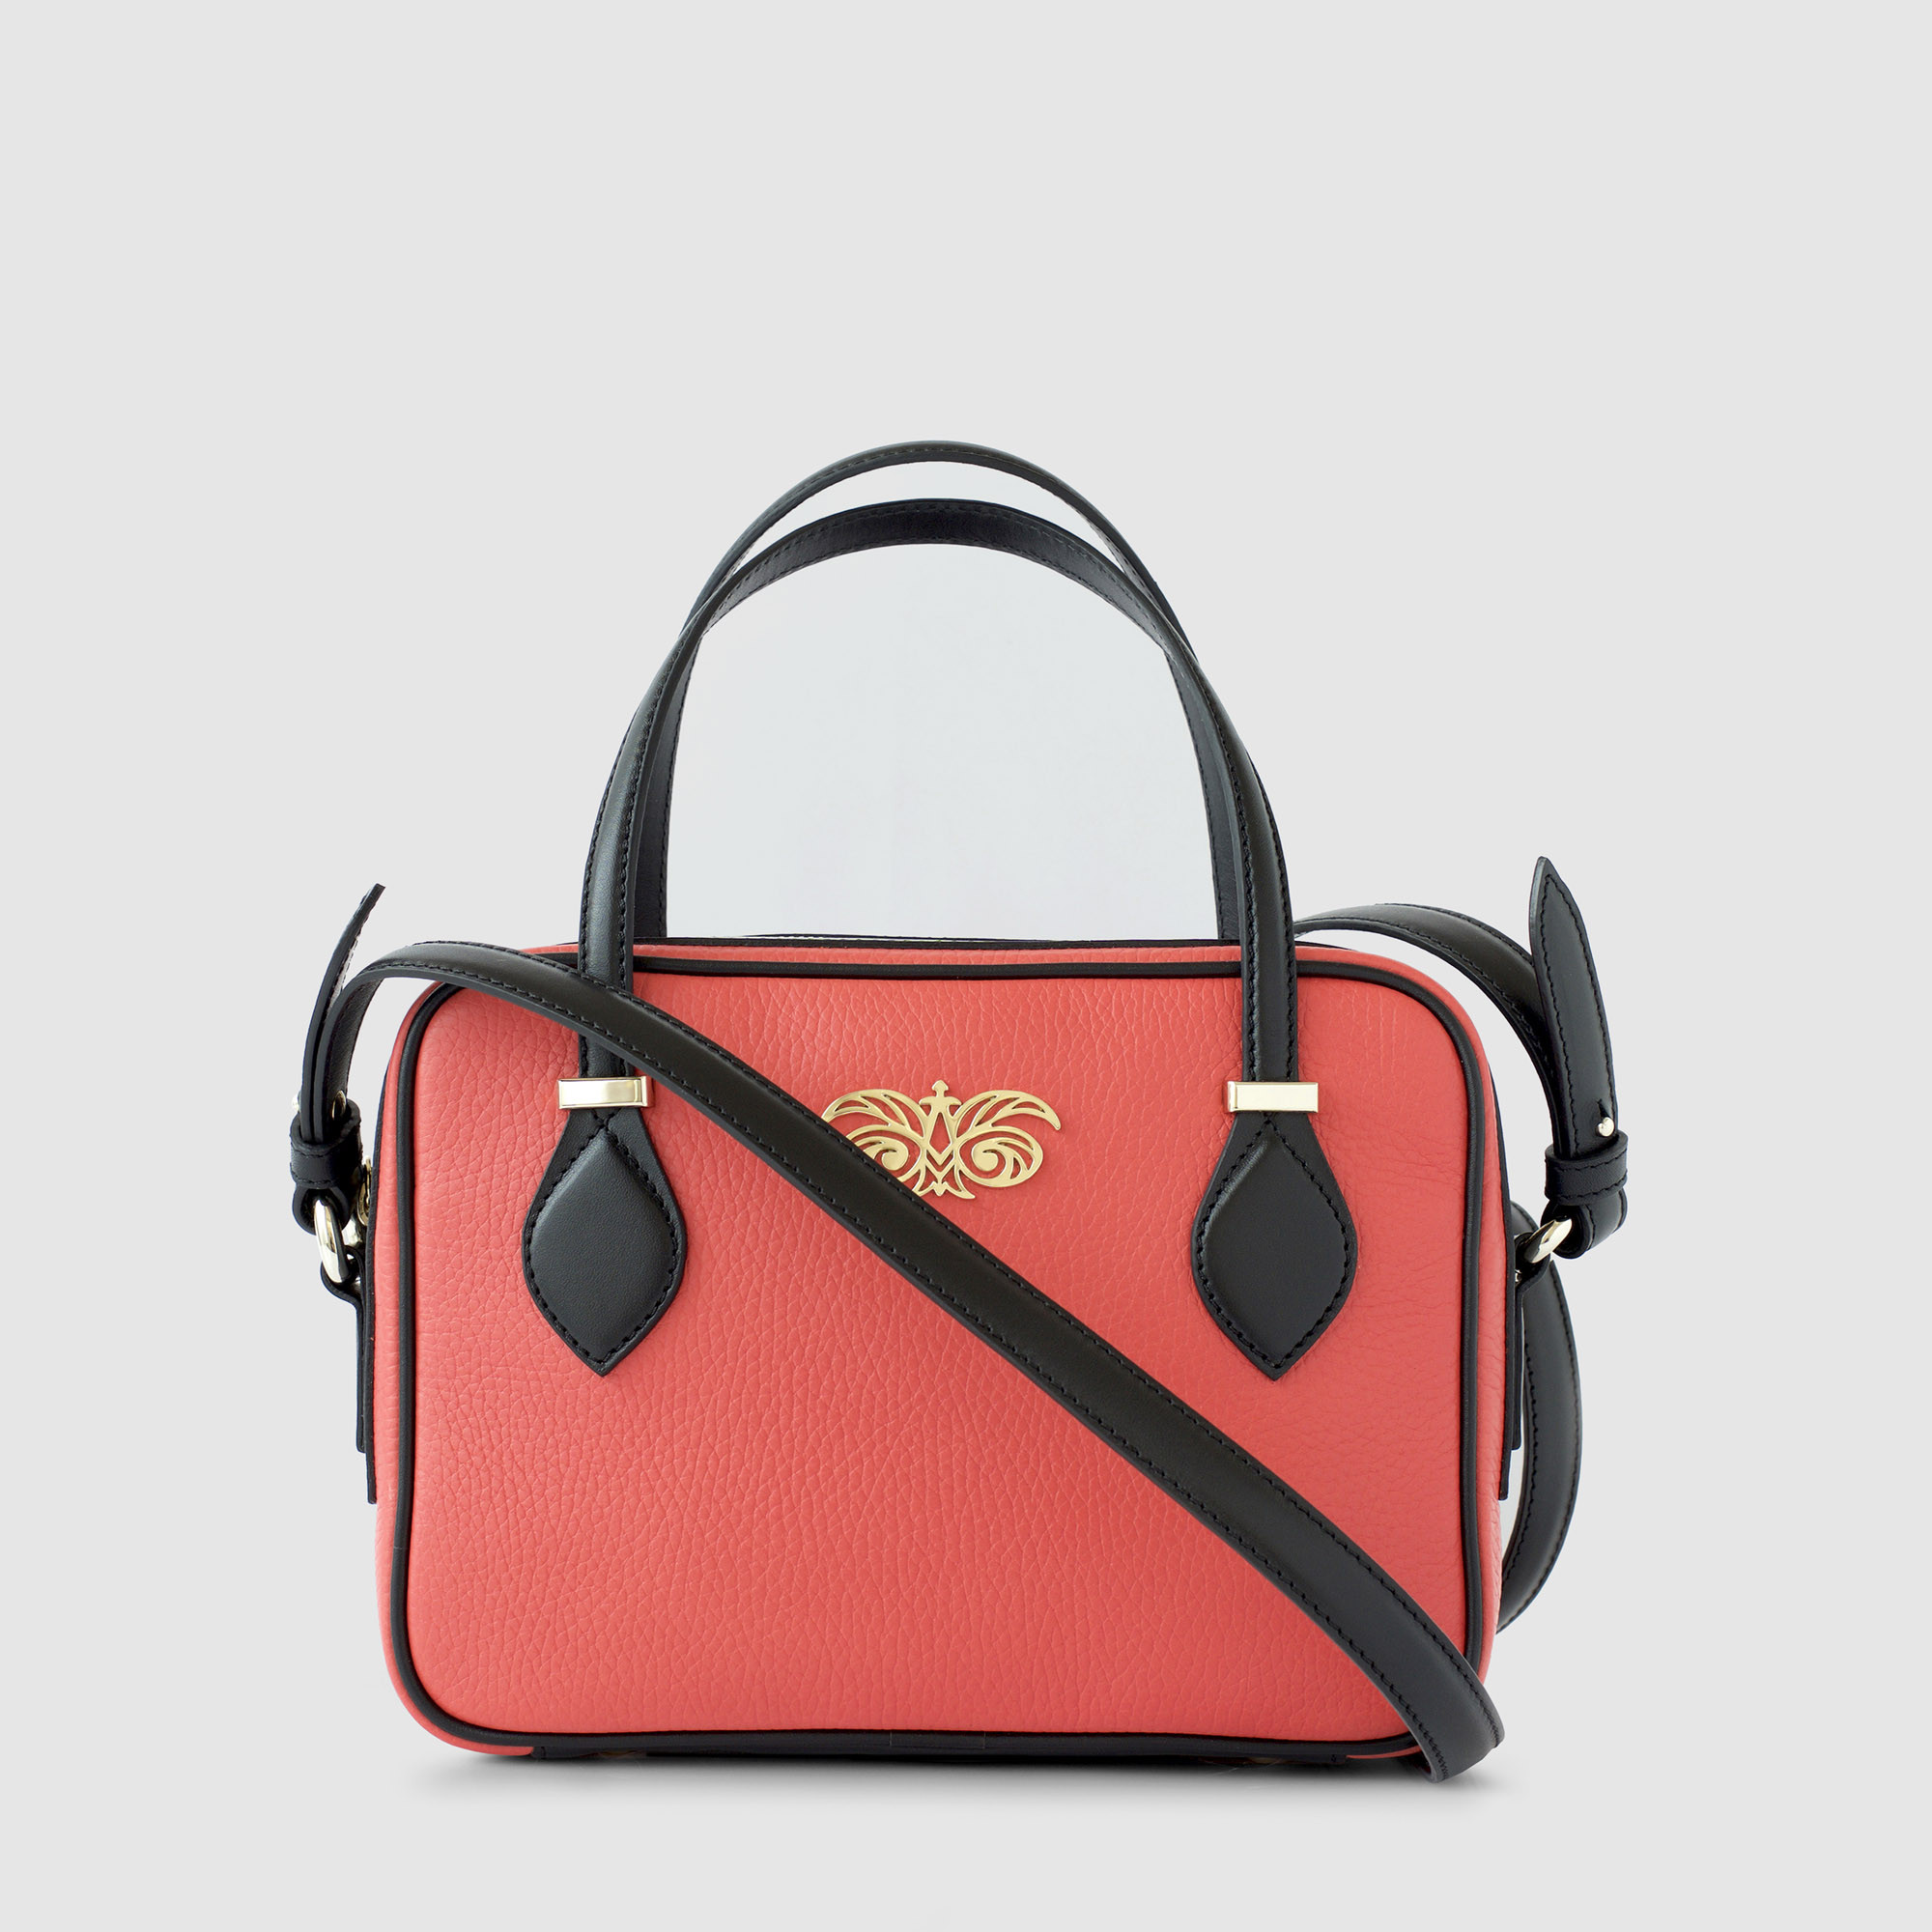 JULIETTE, leather handbag in grained leather, hibiscus color - front view